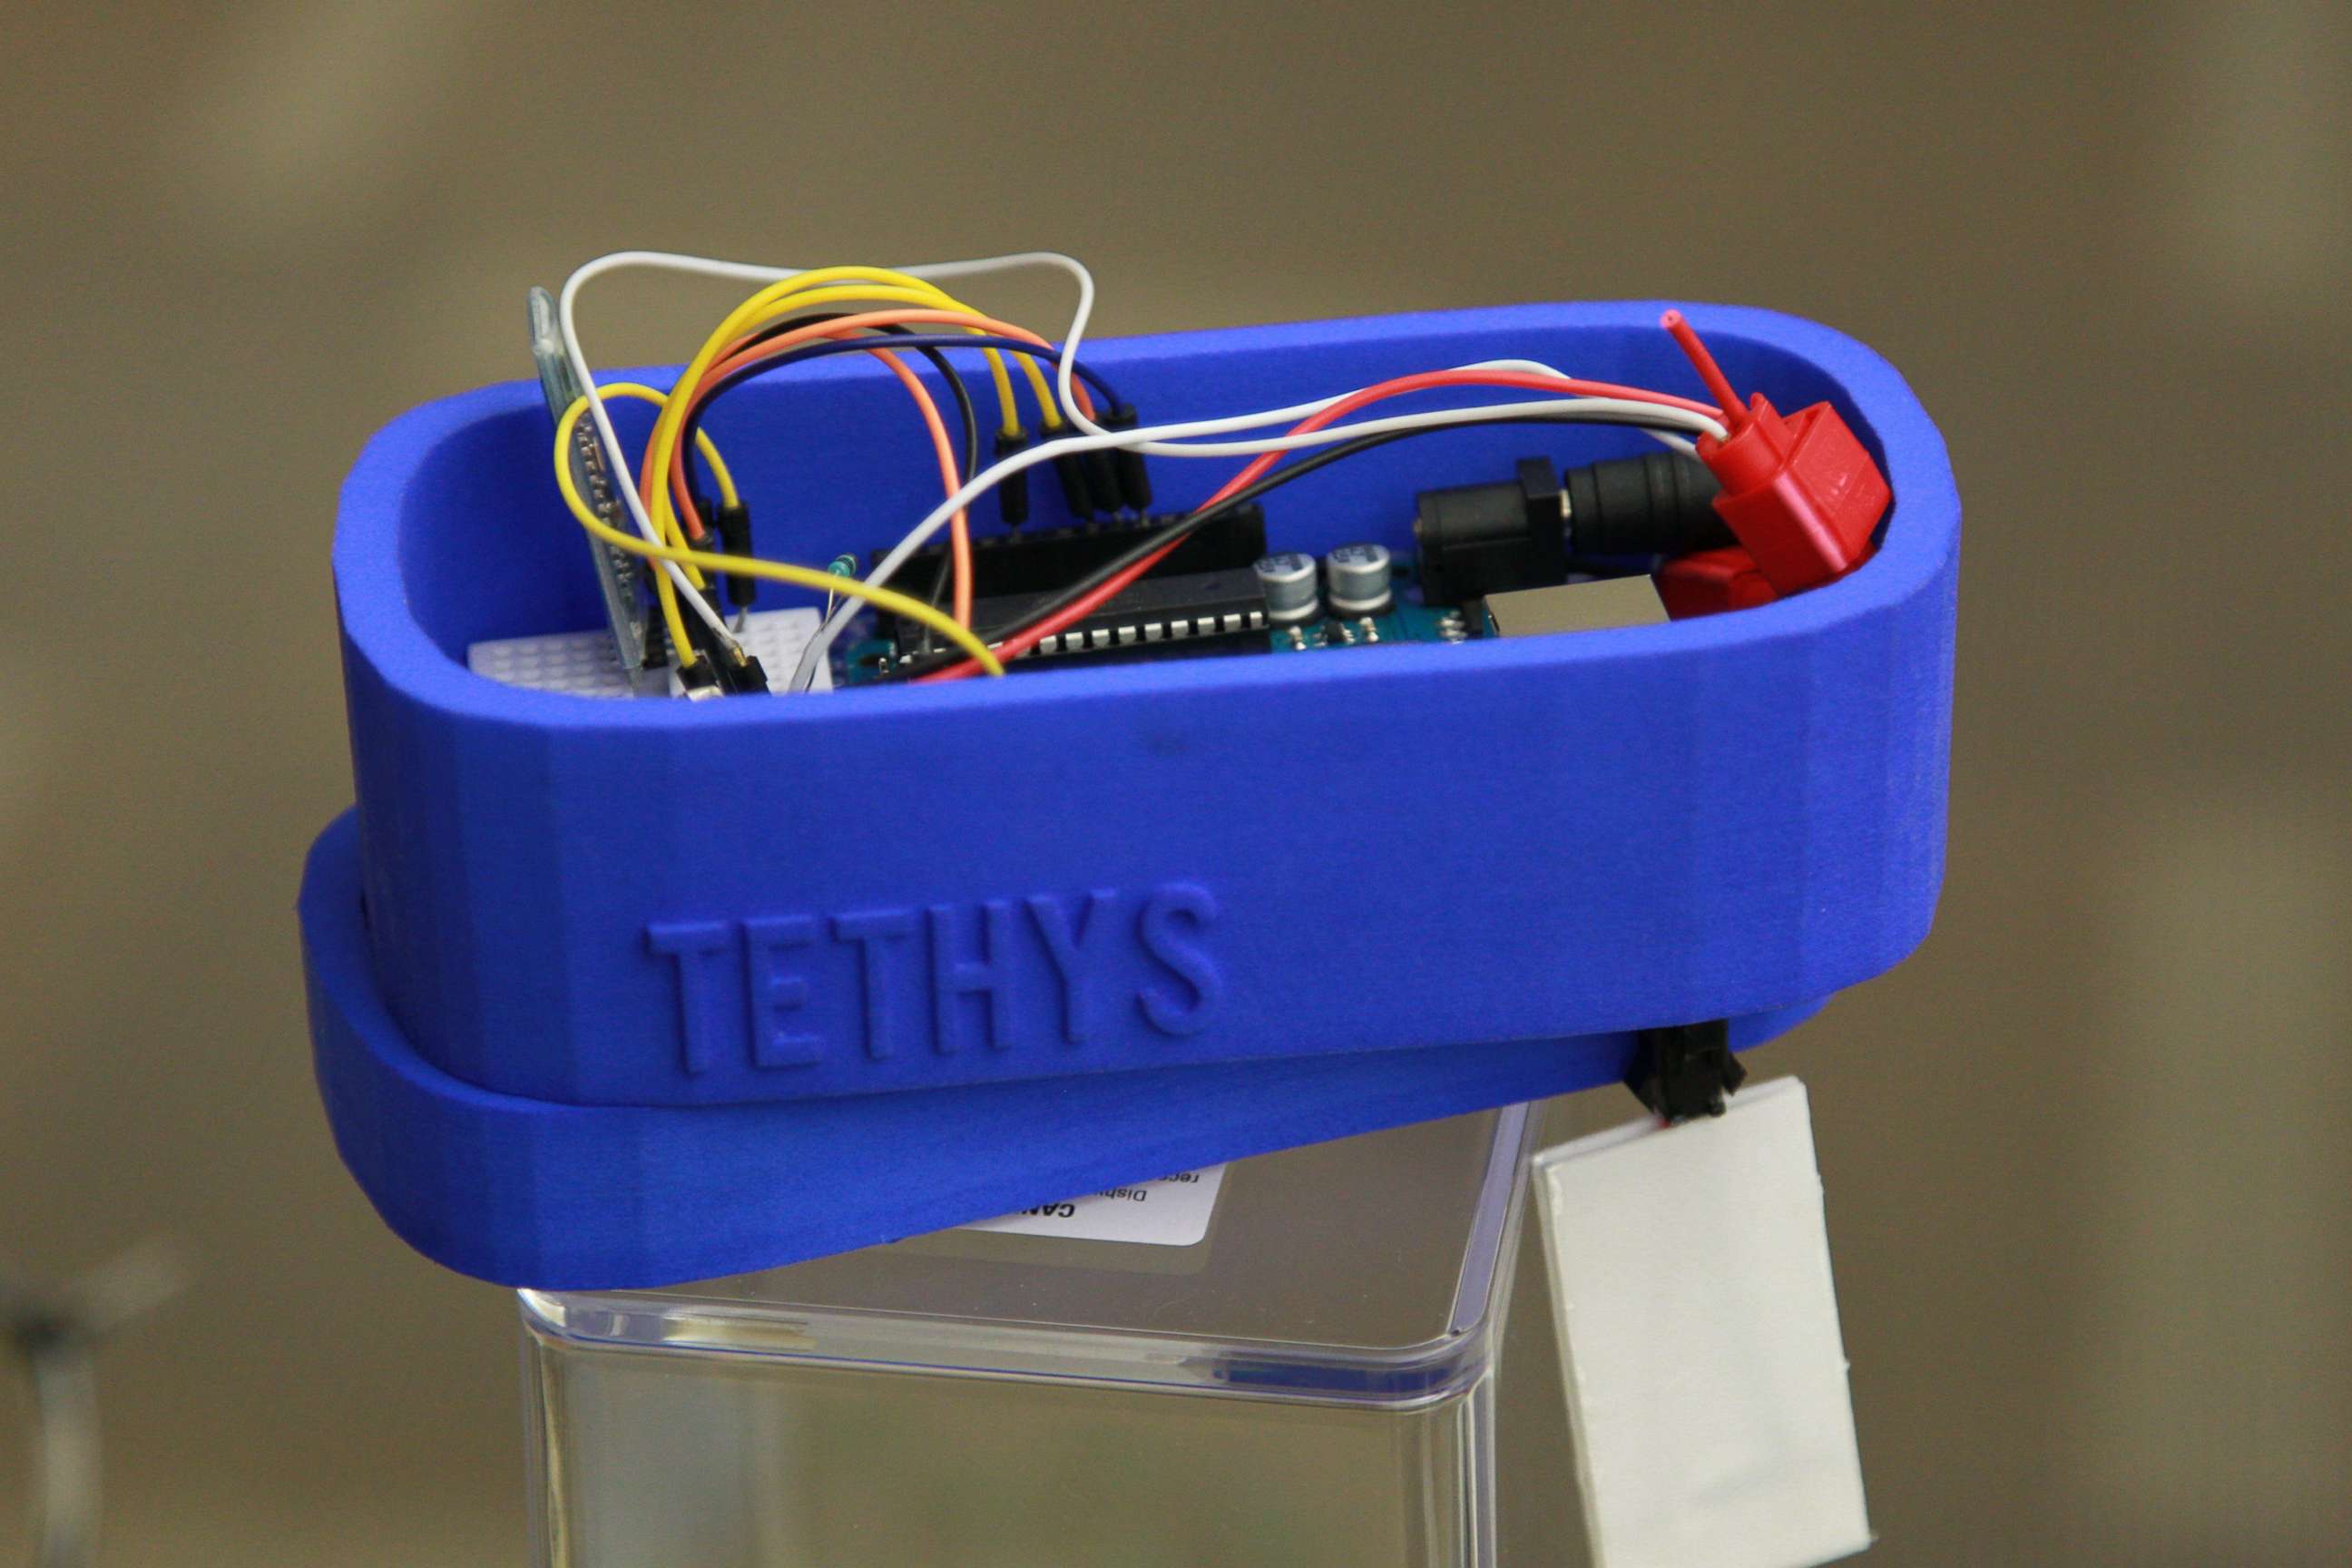 PHOTO: Gitanjali Rao developed a device called Tethys to detect lead in water.